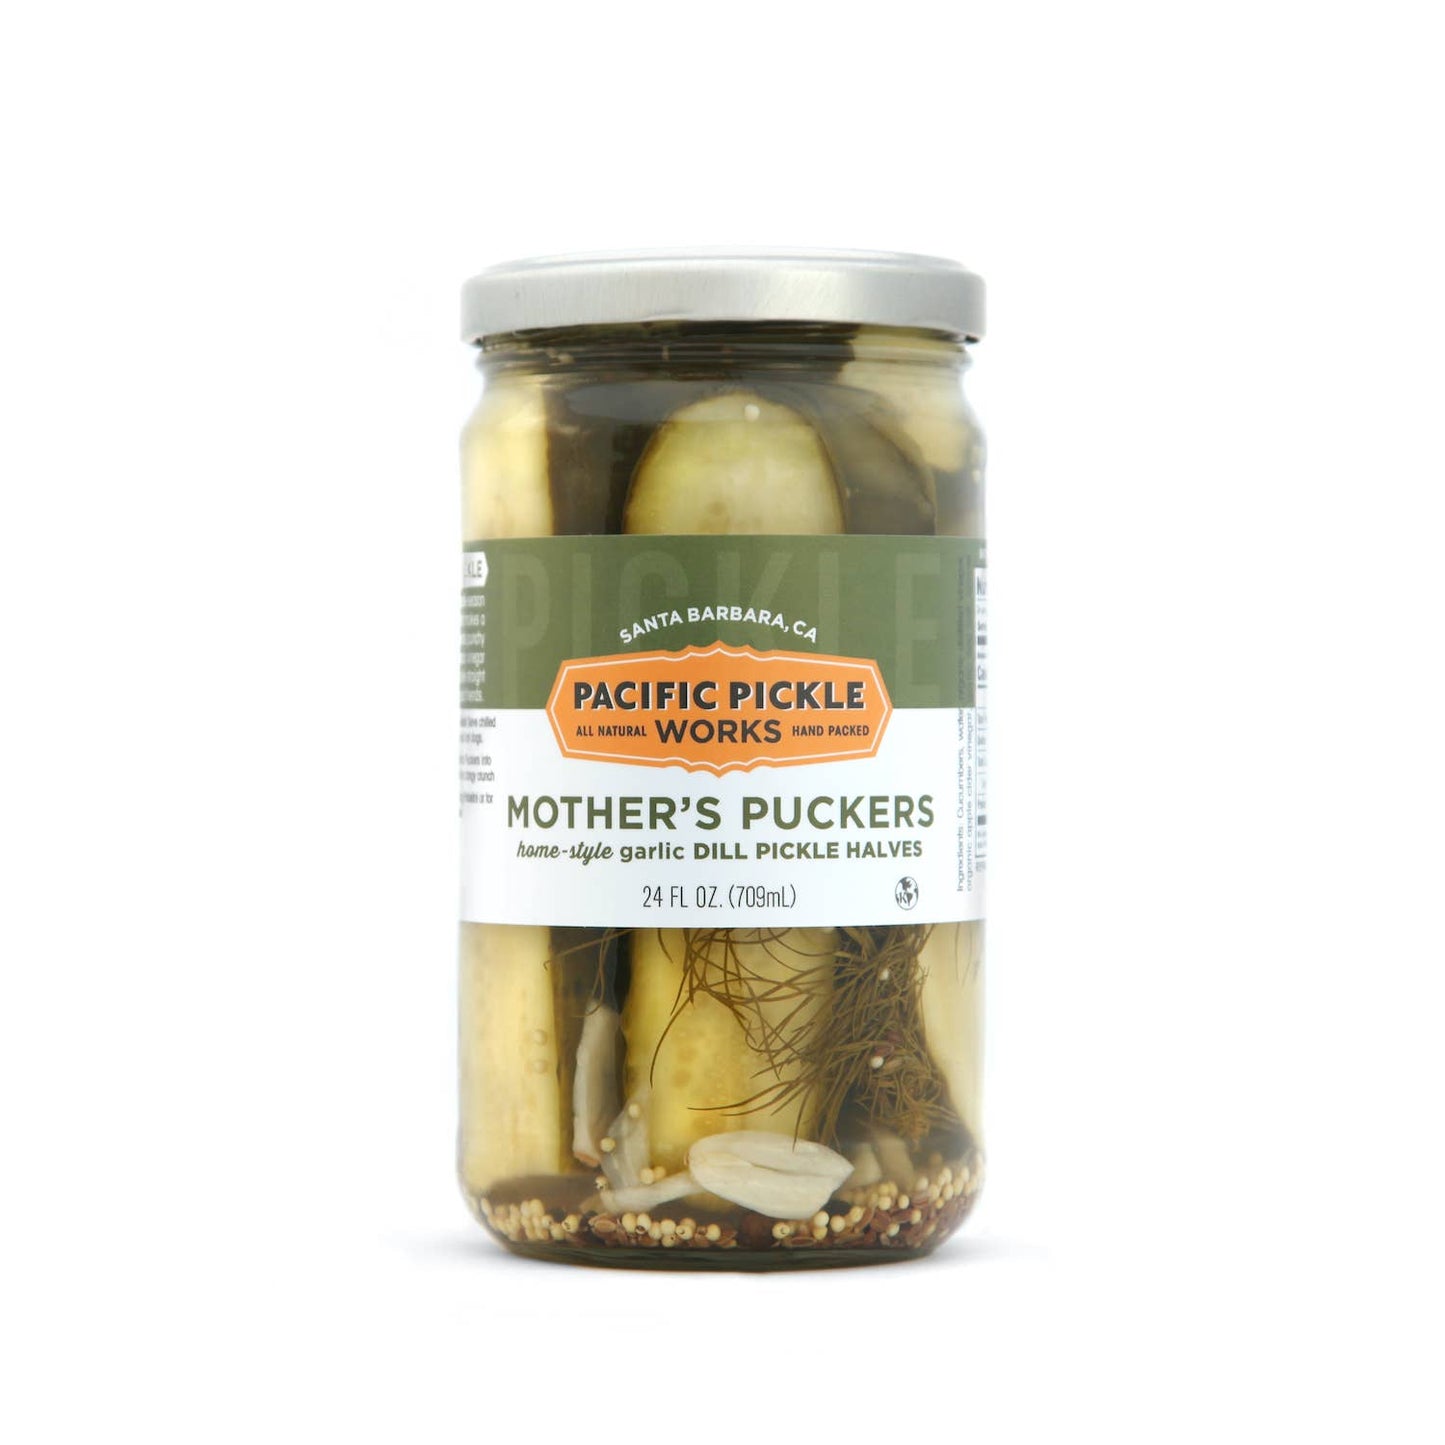 Pacific Pickle Works - Mother's Puckers - Home-style Garlic Dill Pickles